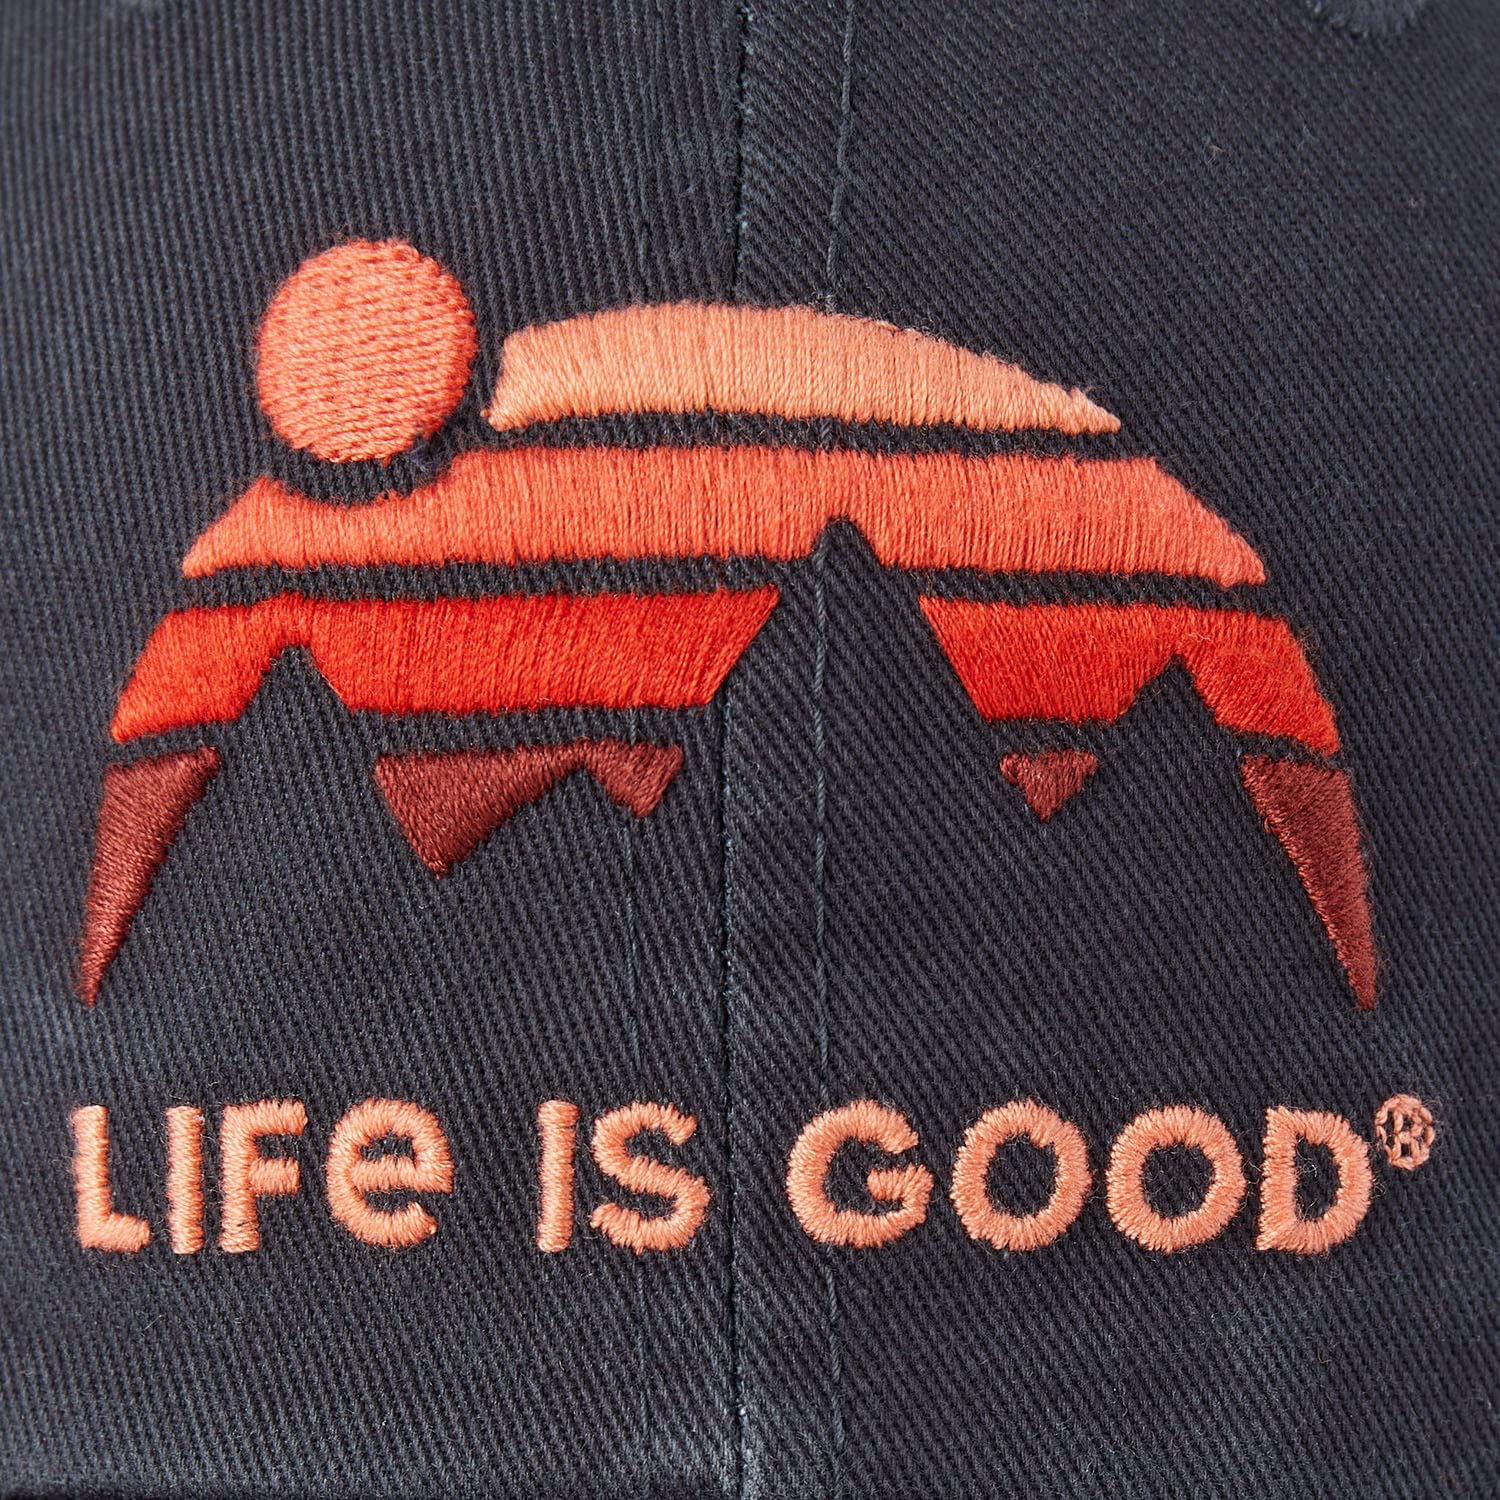 Life is Good Retro Mountains Chill Cap